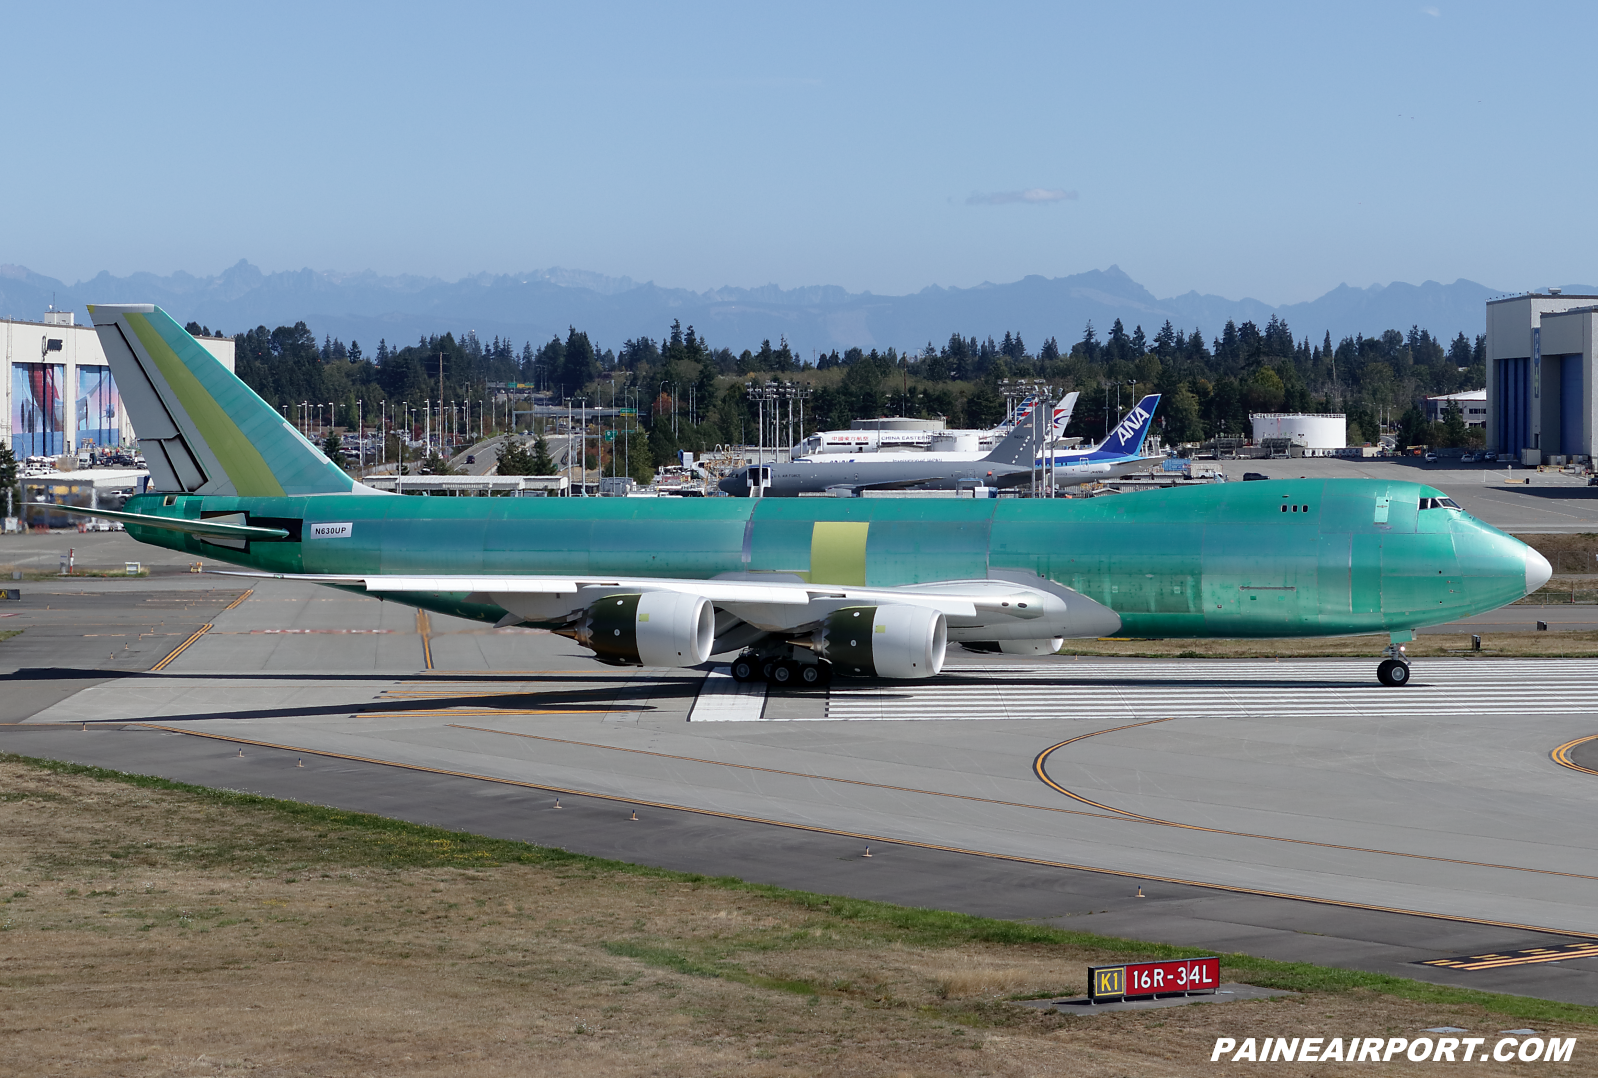 UPS 747-8F N630UP at KPAE Paine Field